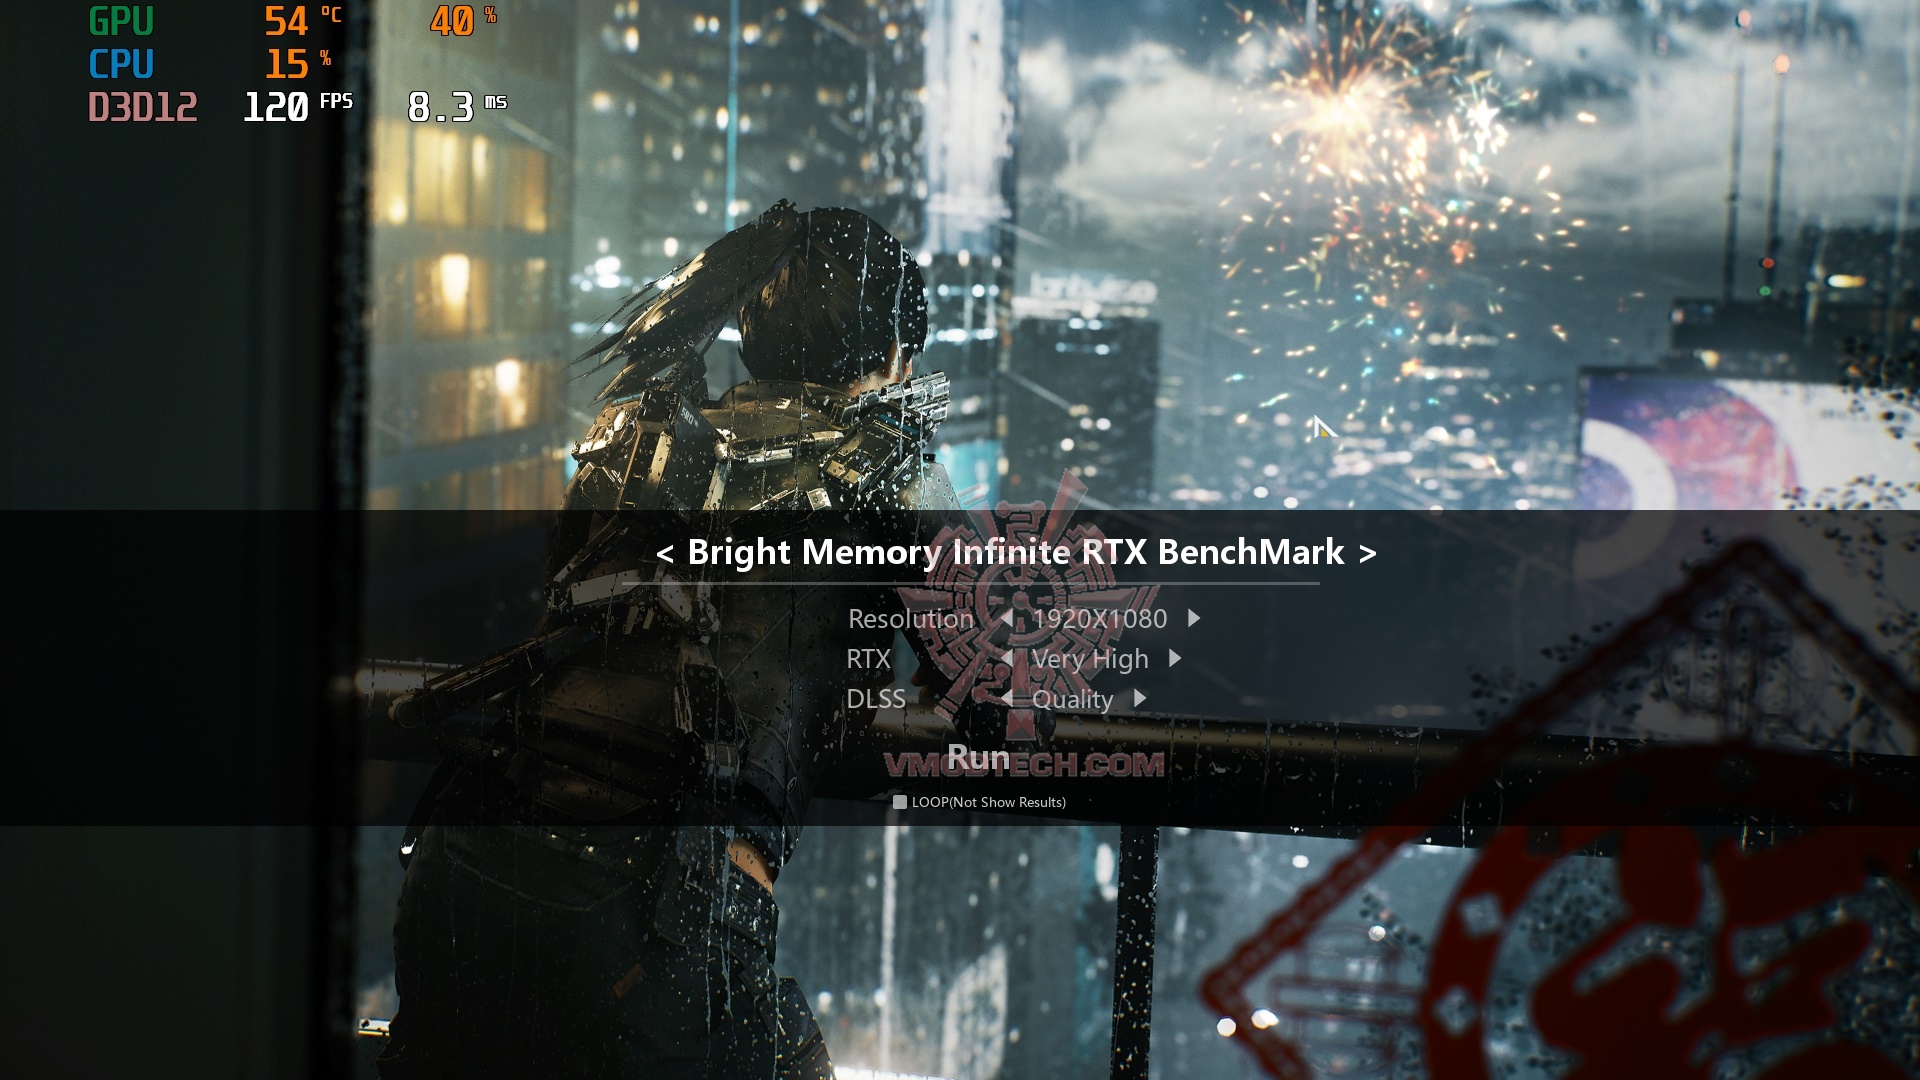 bmibenchmark win64 shipping 2020 09 15 15 45 09 090 GIGABYTE GeForce RTX 3090 GAMING OC 24G Review